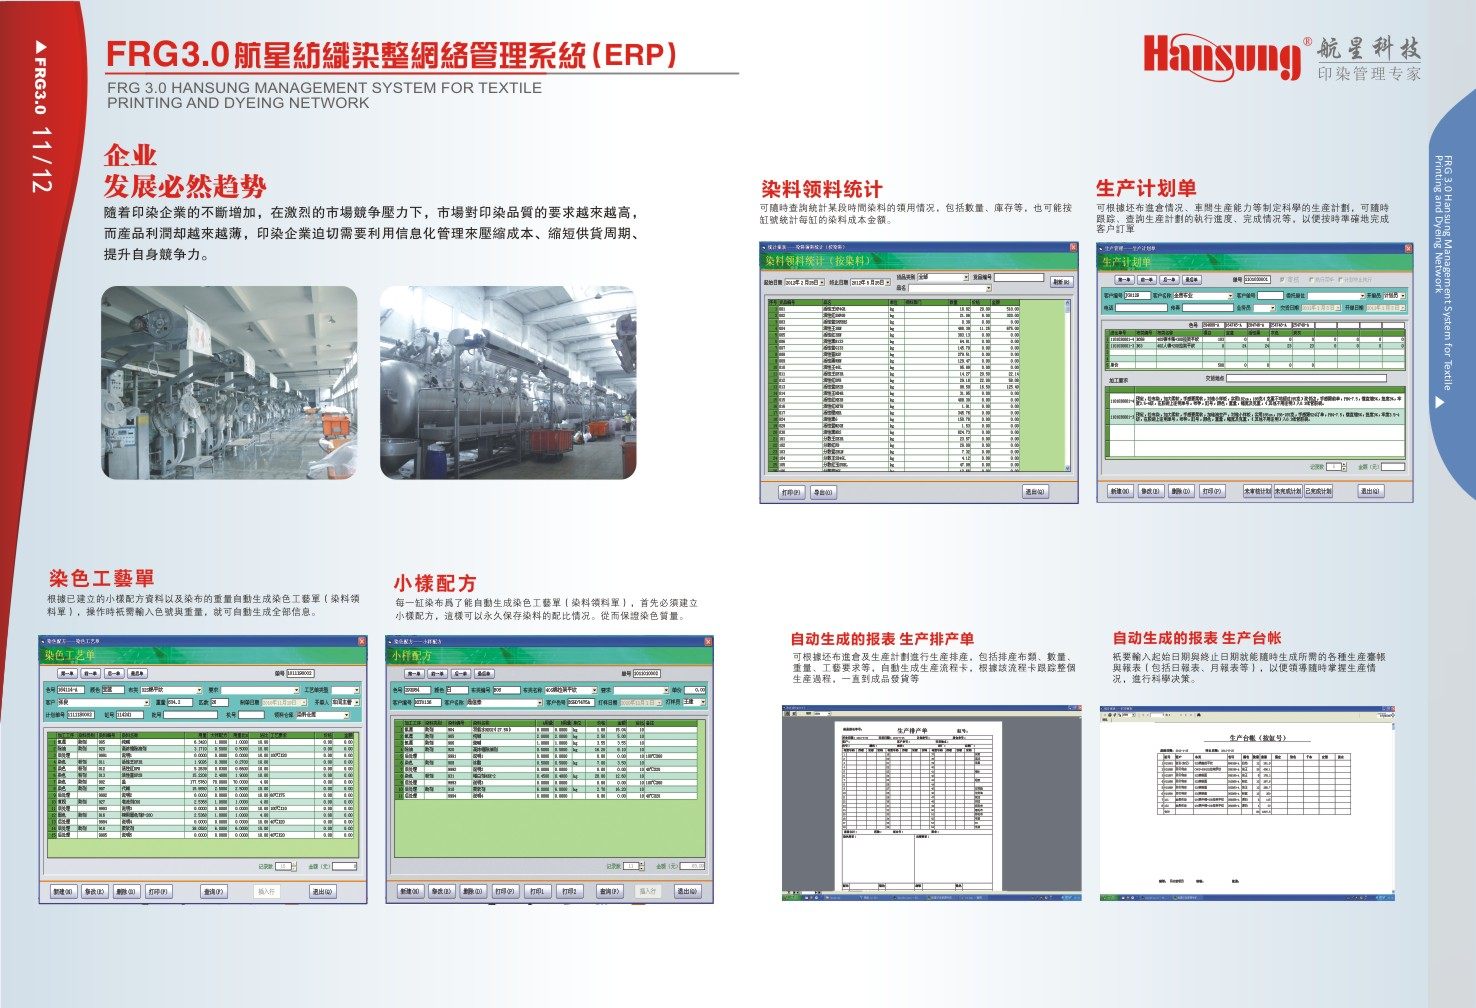 FRG3.0 Hansung Management System for Textile Printing and Dyeing Network